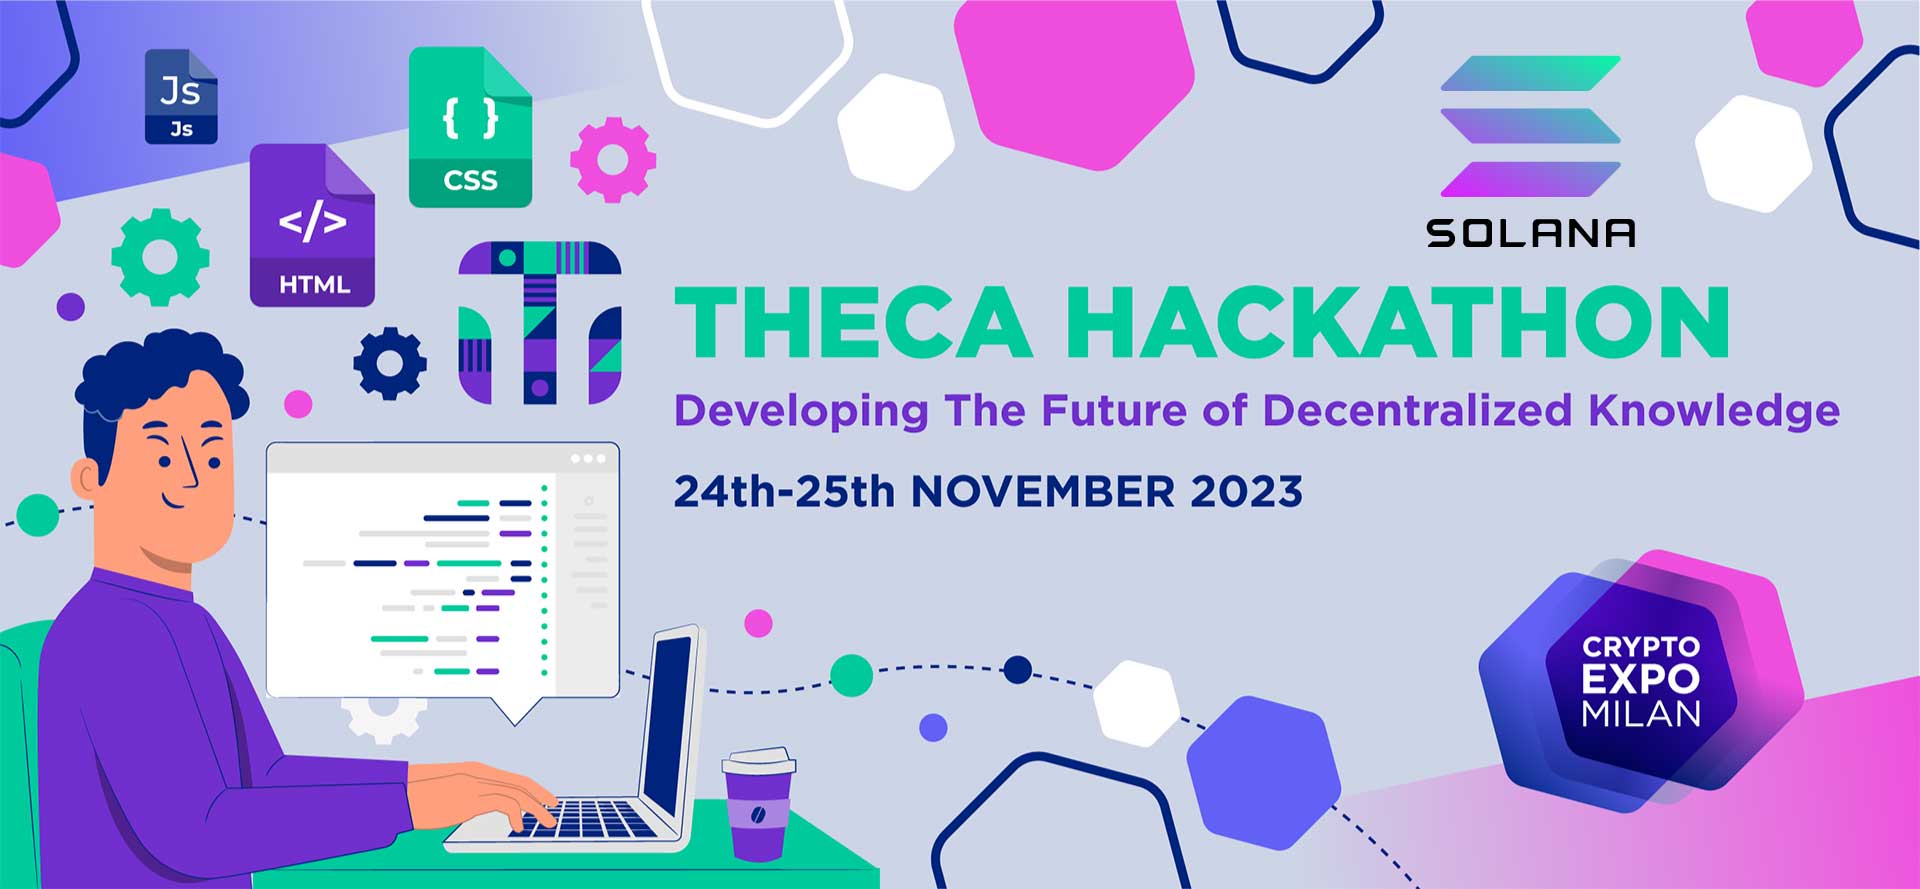 Developing The Future of Decentralized Knowledge with Theca Hackathon